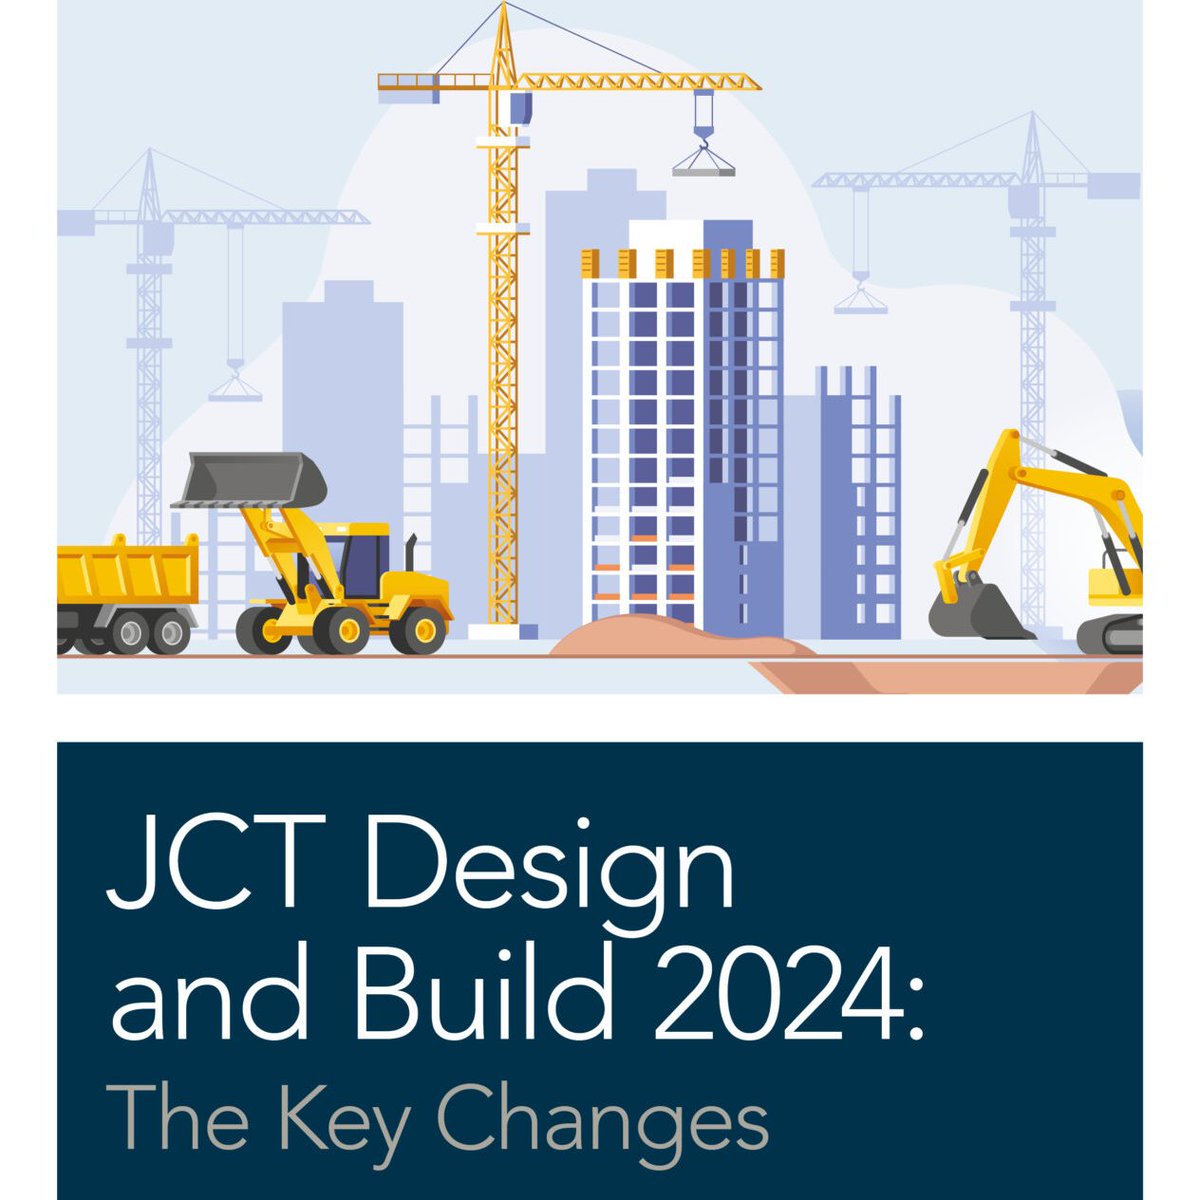 Register now for our latest seminar in conjunction with @ConExcellence, where we will be outlining the key changes within the JCT’s latest version of its Design and Build family of contracts tinyurl.com/5cshuhwp @SintonsLaw #Seminar #ConstructionUpdate